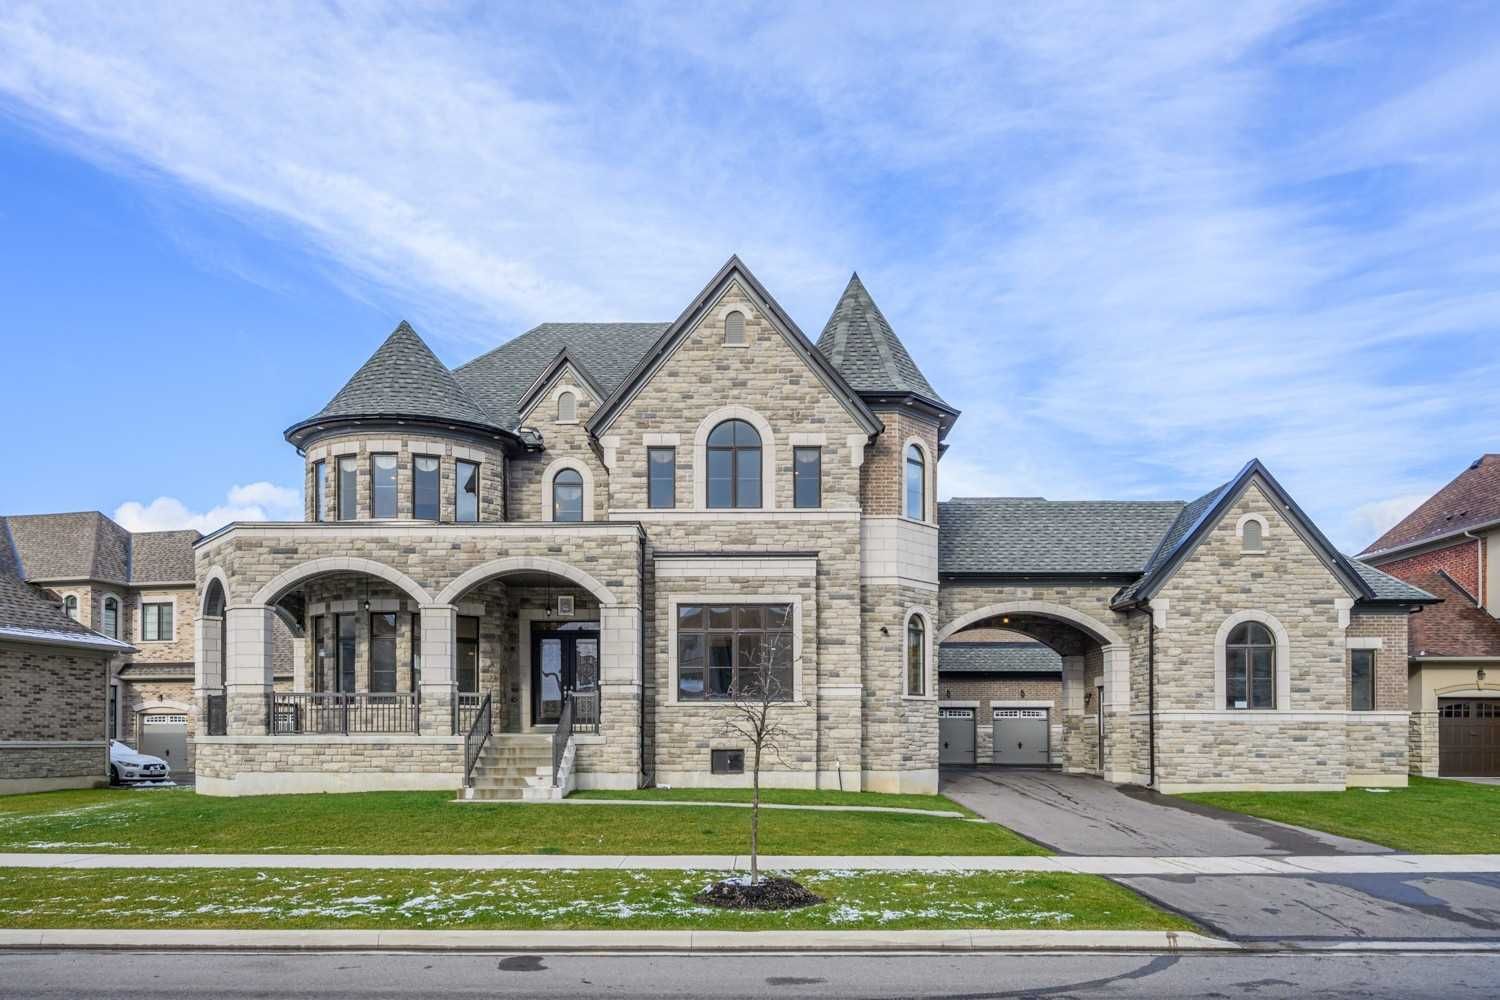 How Can You House for Sale in Brampton ON?